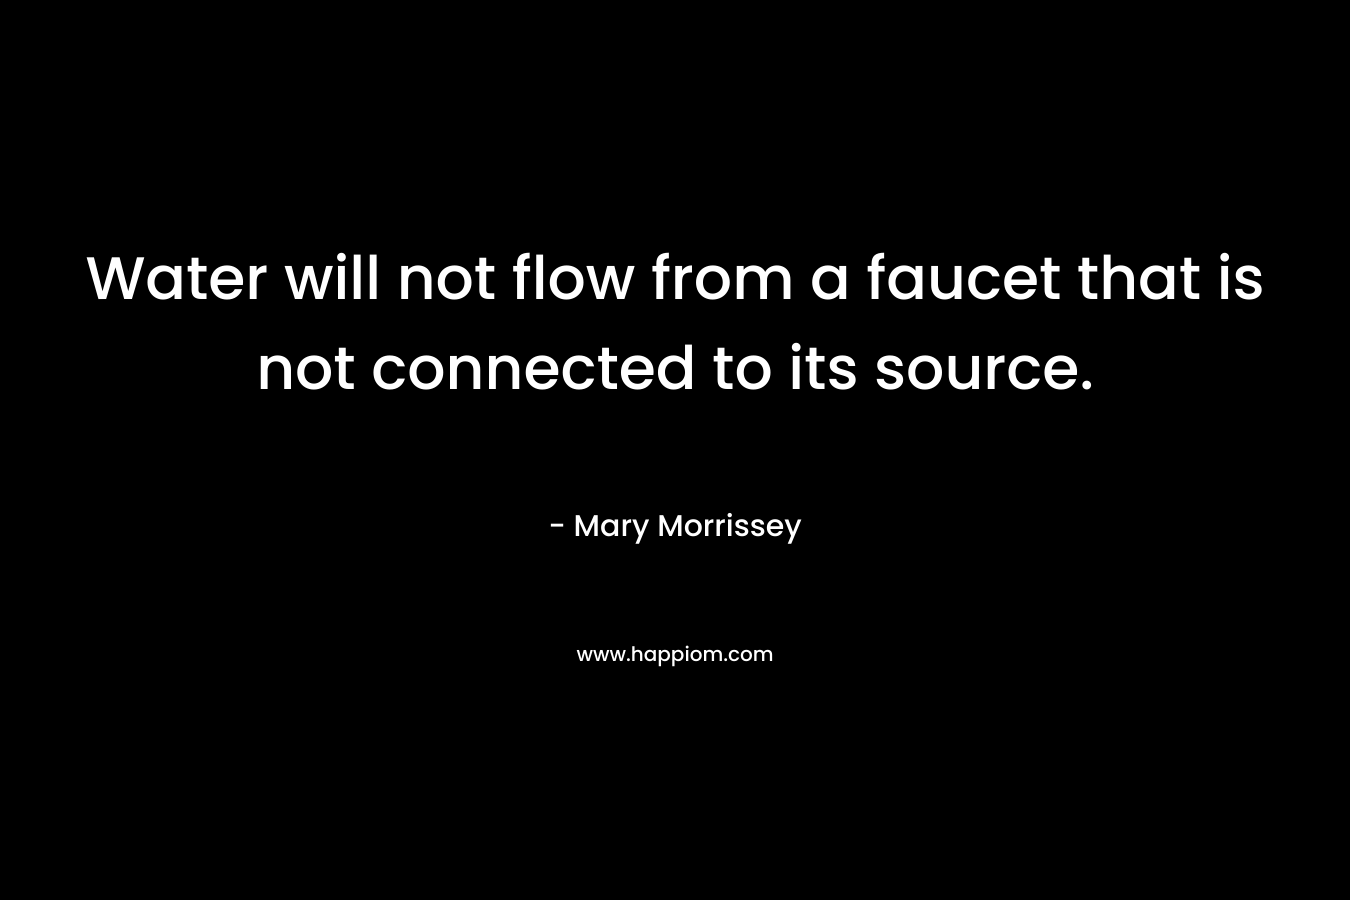 Water will not flow from a faucet that is not connected to its source. – Mary Morrissey